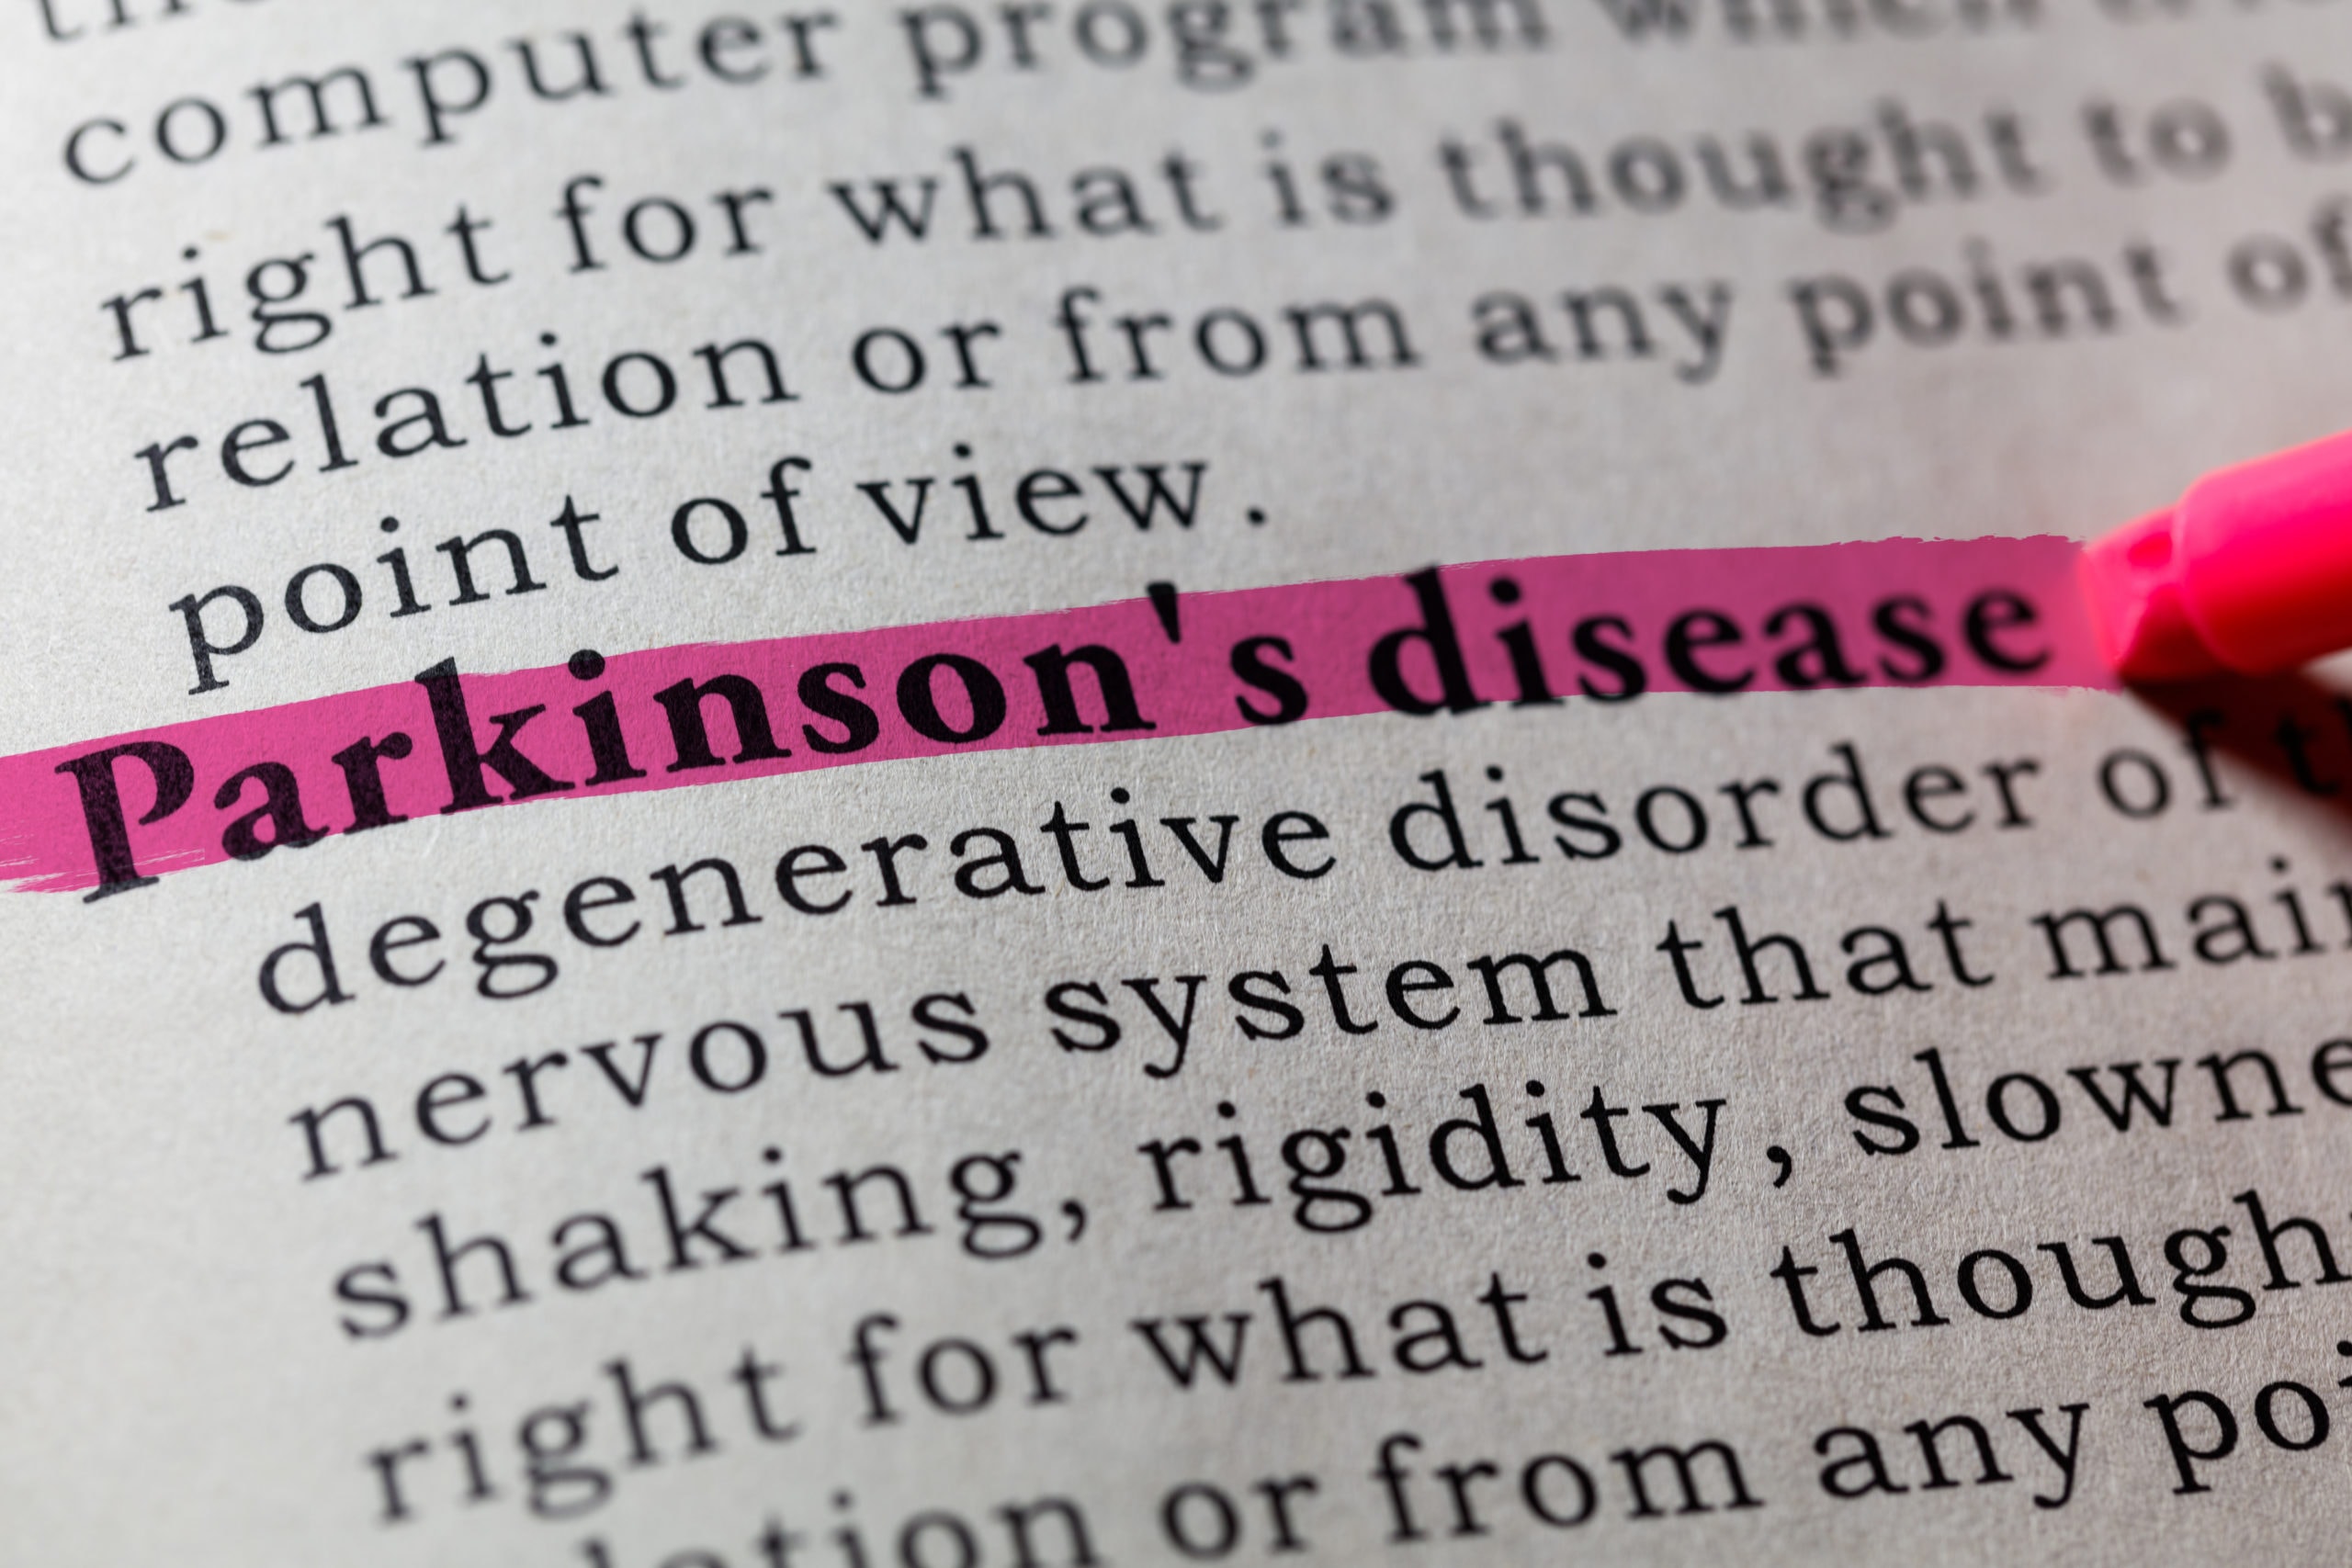 Parkinson's disease highlighted in book